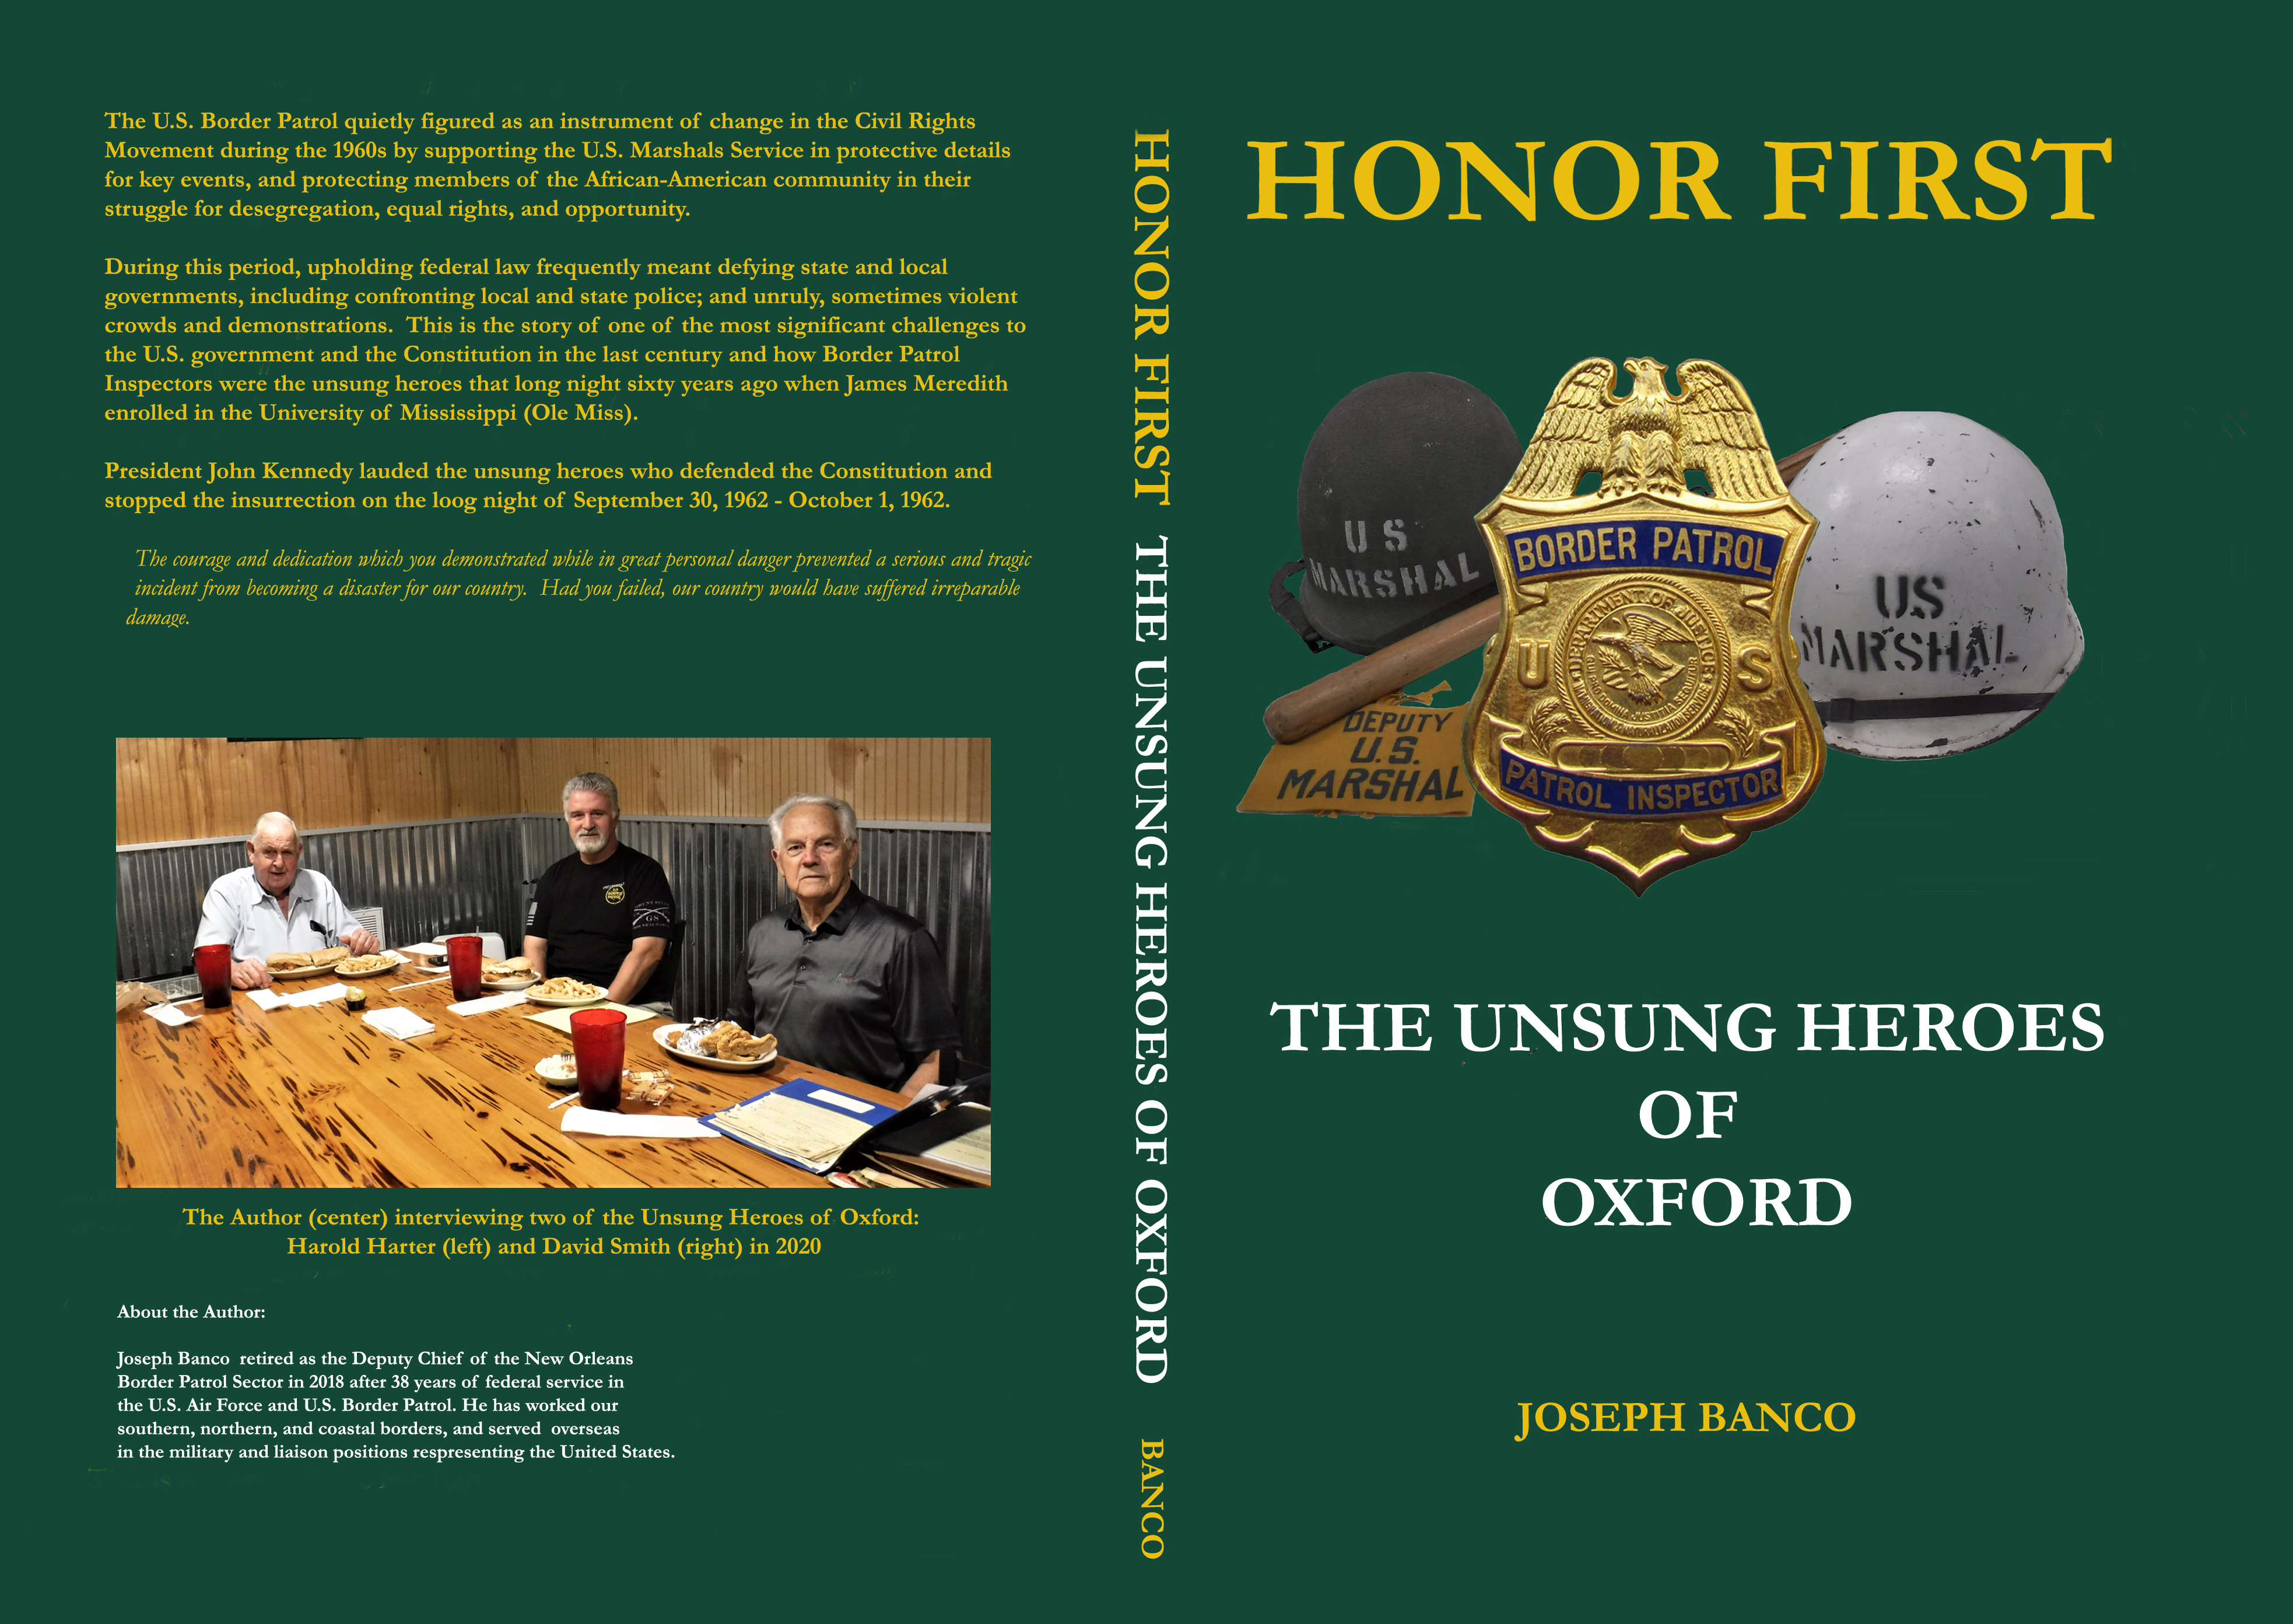 HONOR FIRST: The Unsung Heroes of Oxford